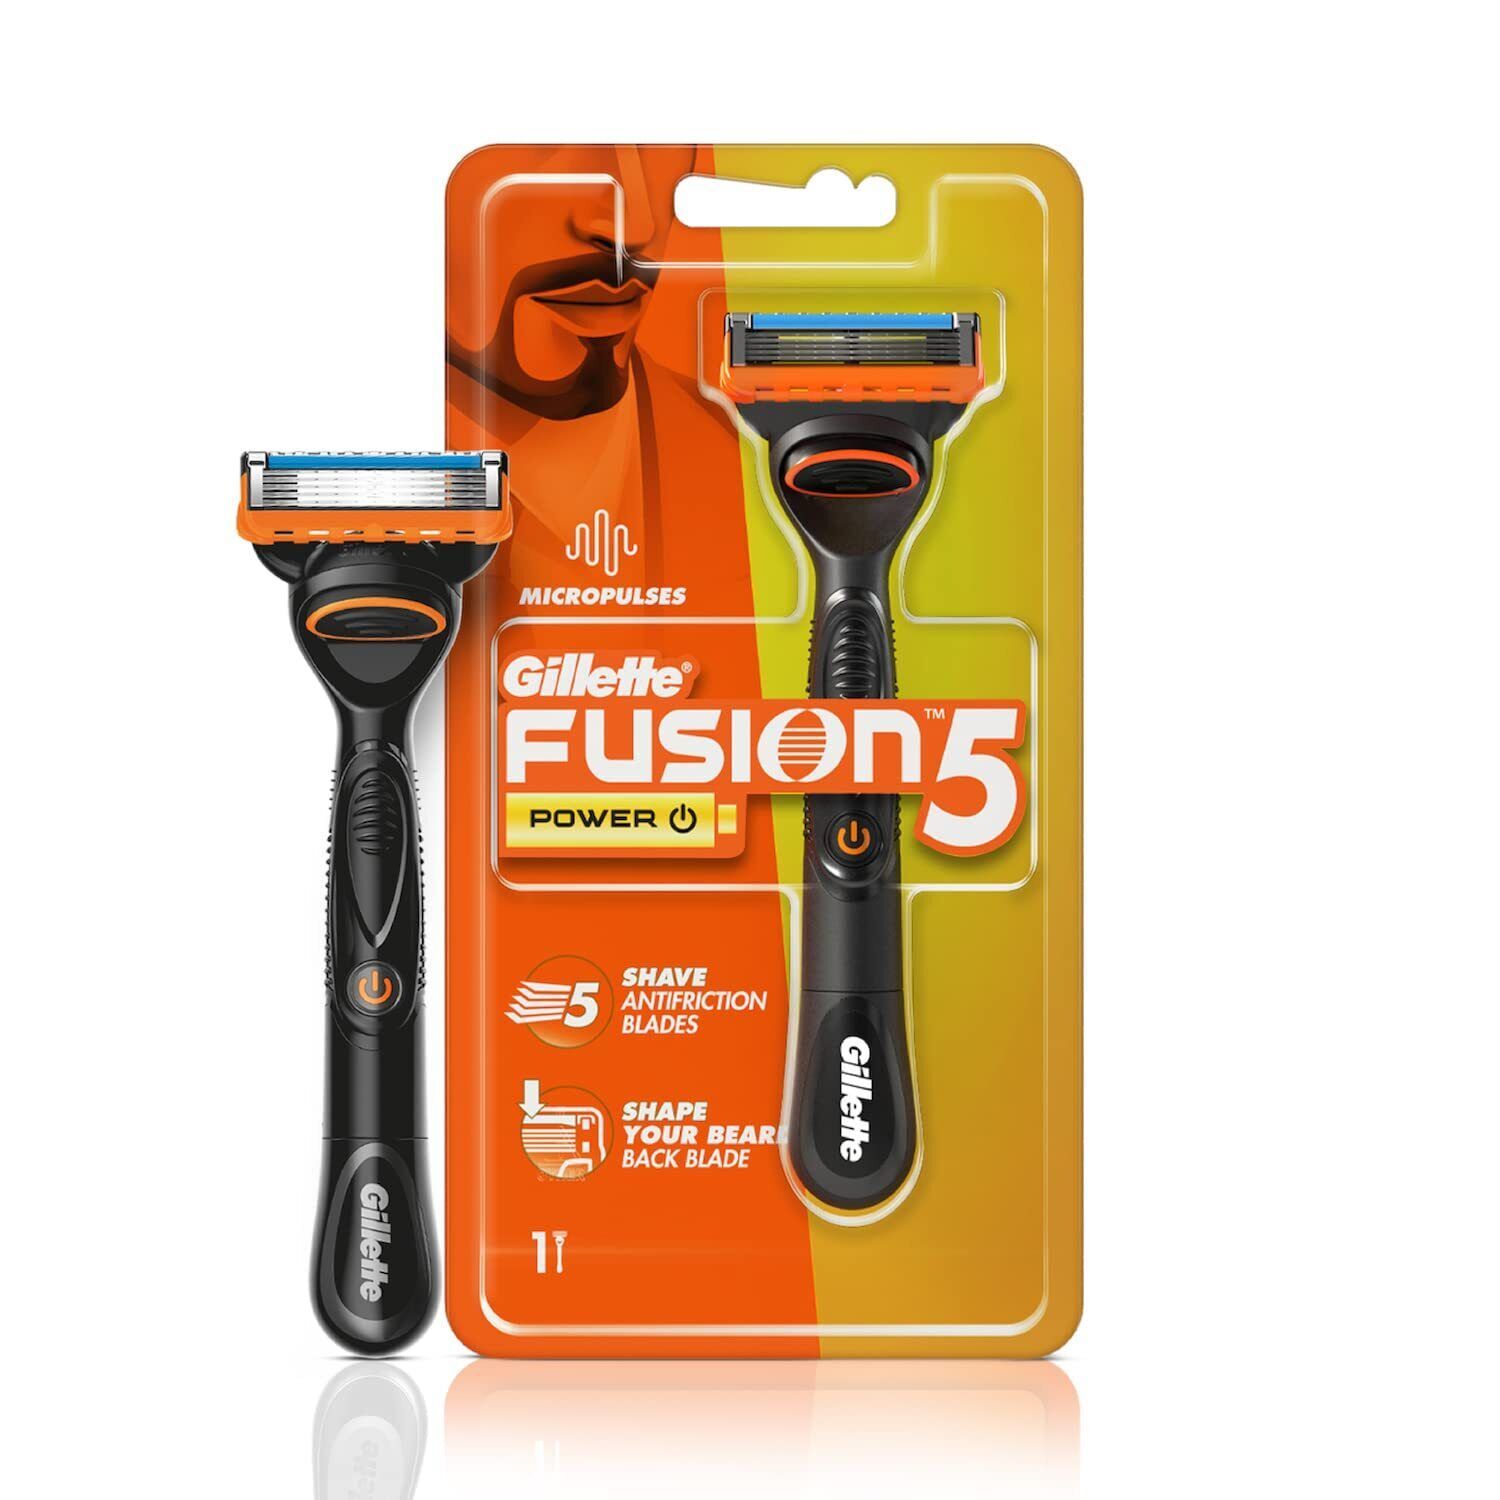 gillette fusion power razor for men with styling back blade for perfect   1 pcs